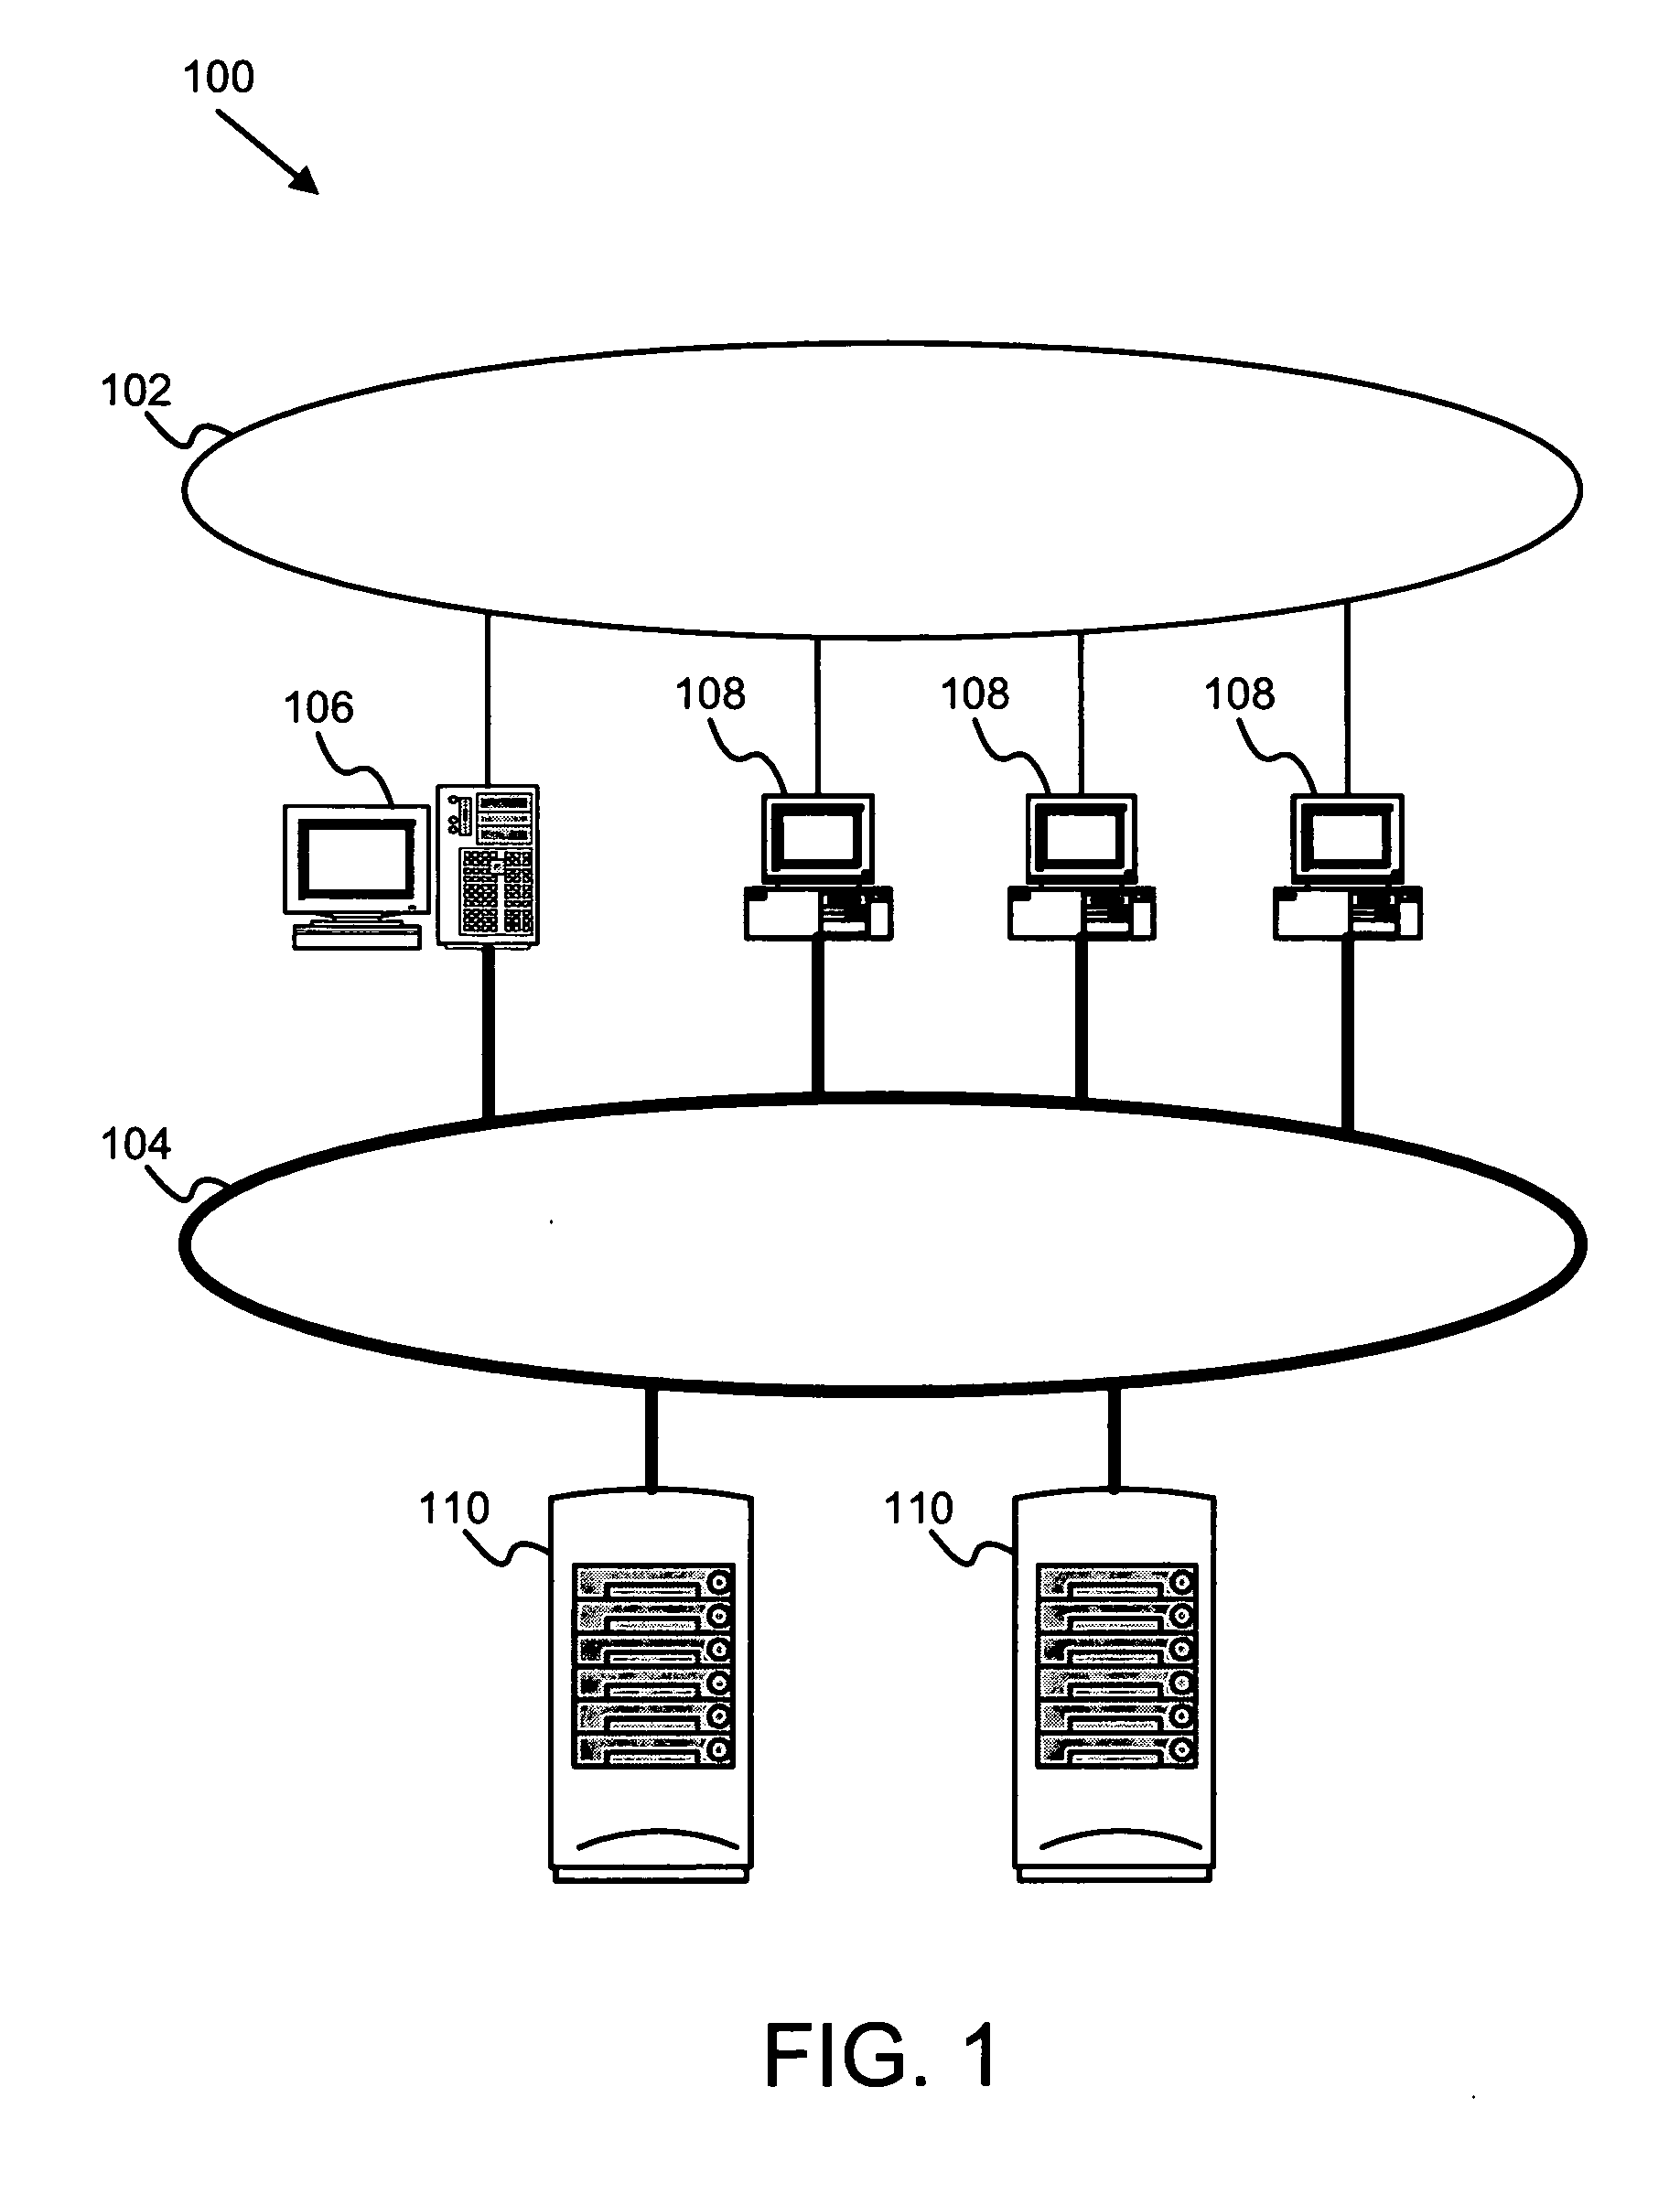 Apparatus, system, and method for data access management